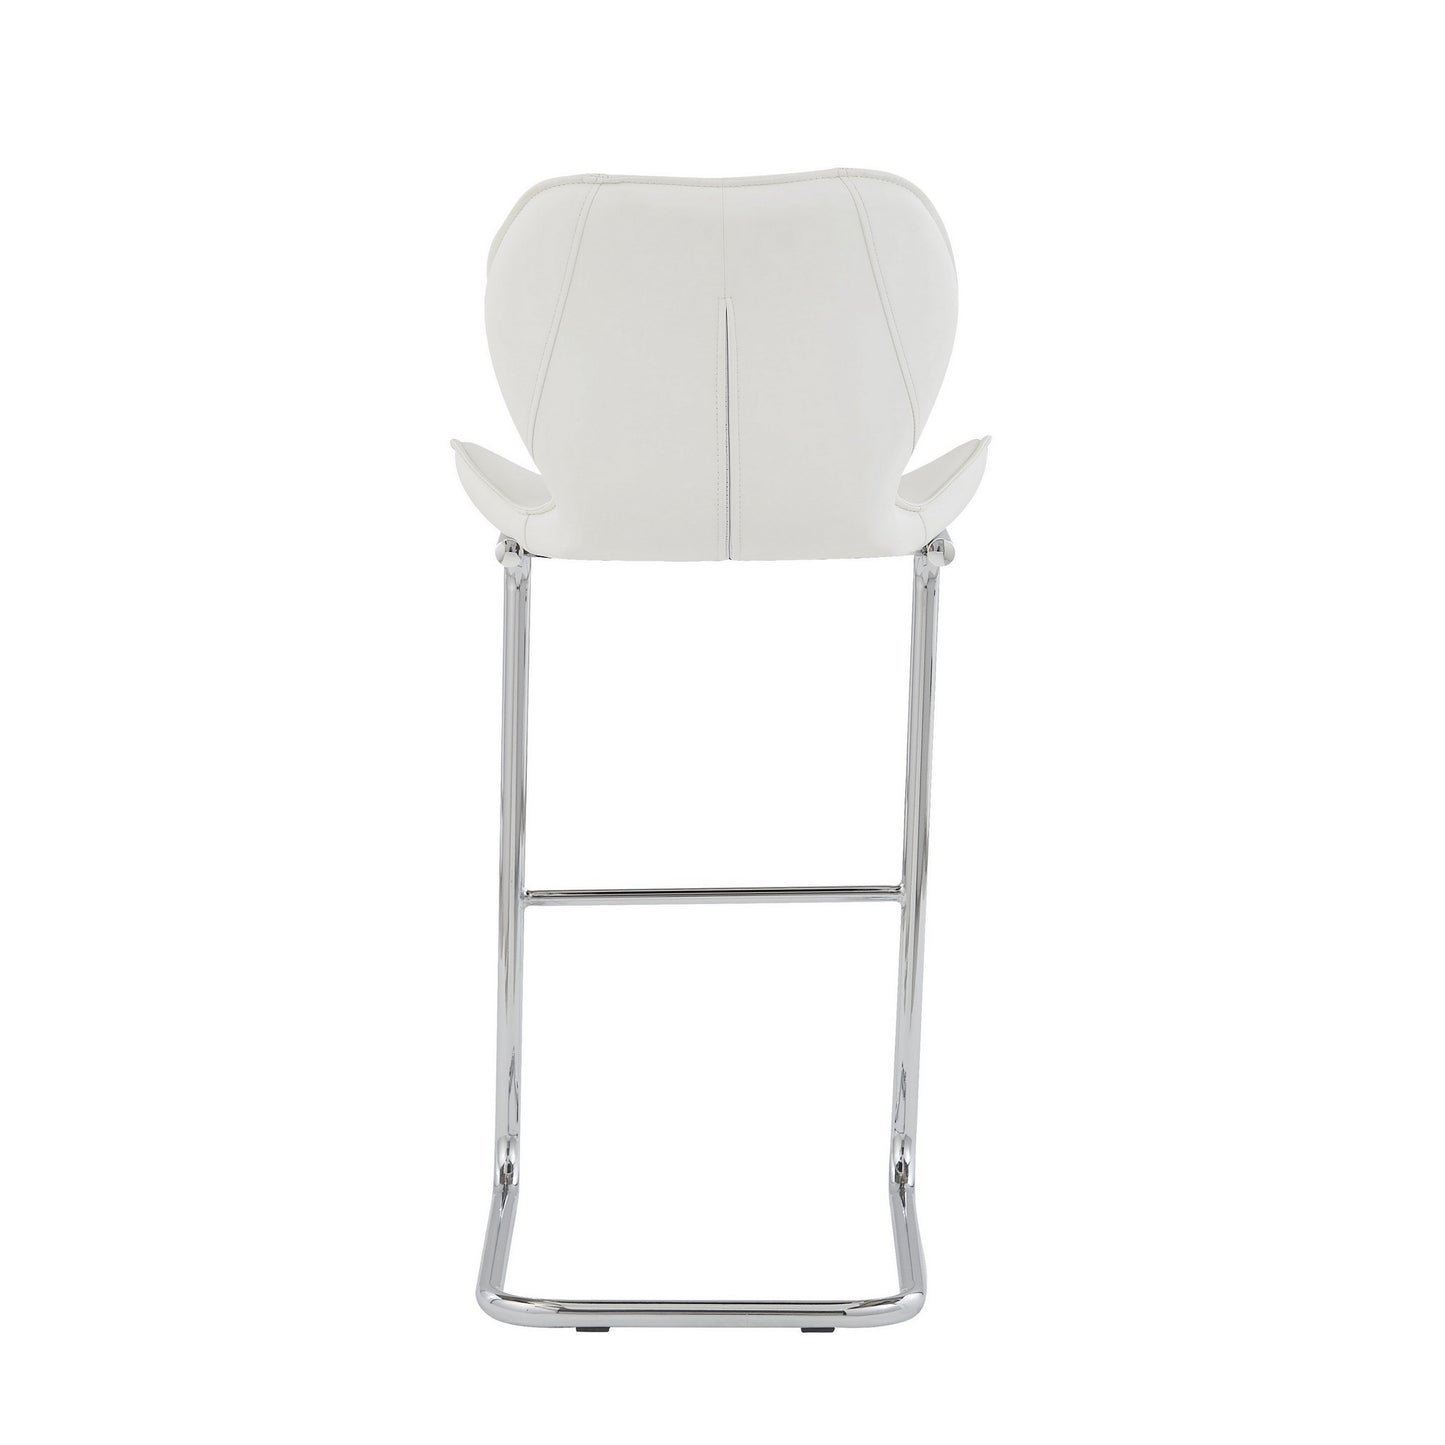 Set Of 4 Modern White Barstools With Chrome Legs By Homeroots